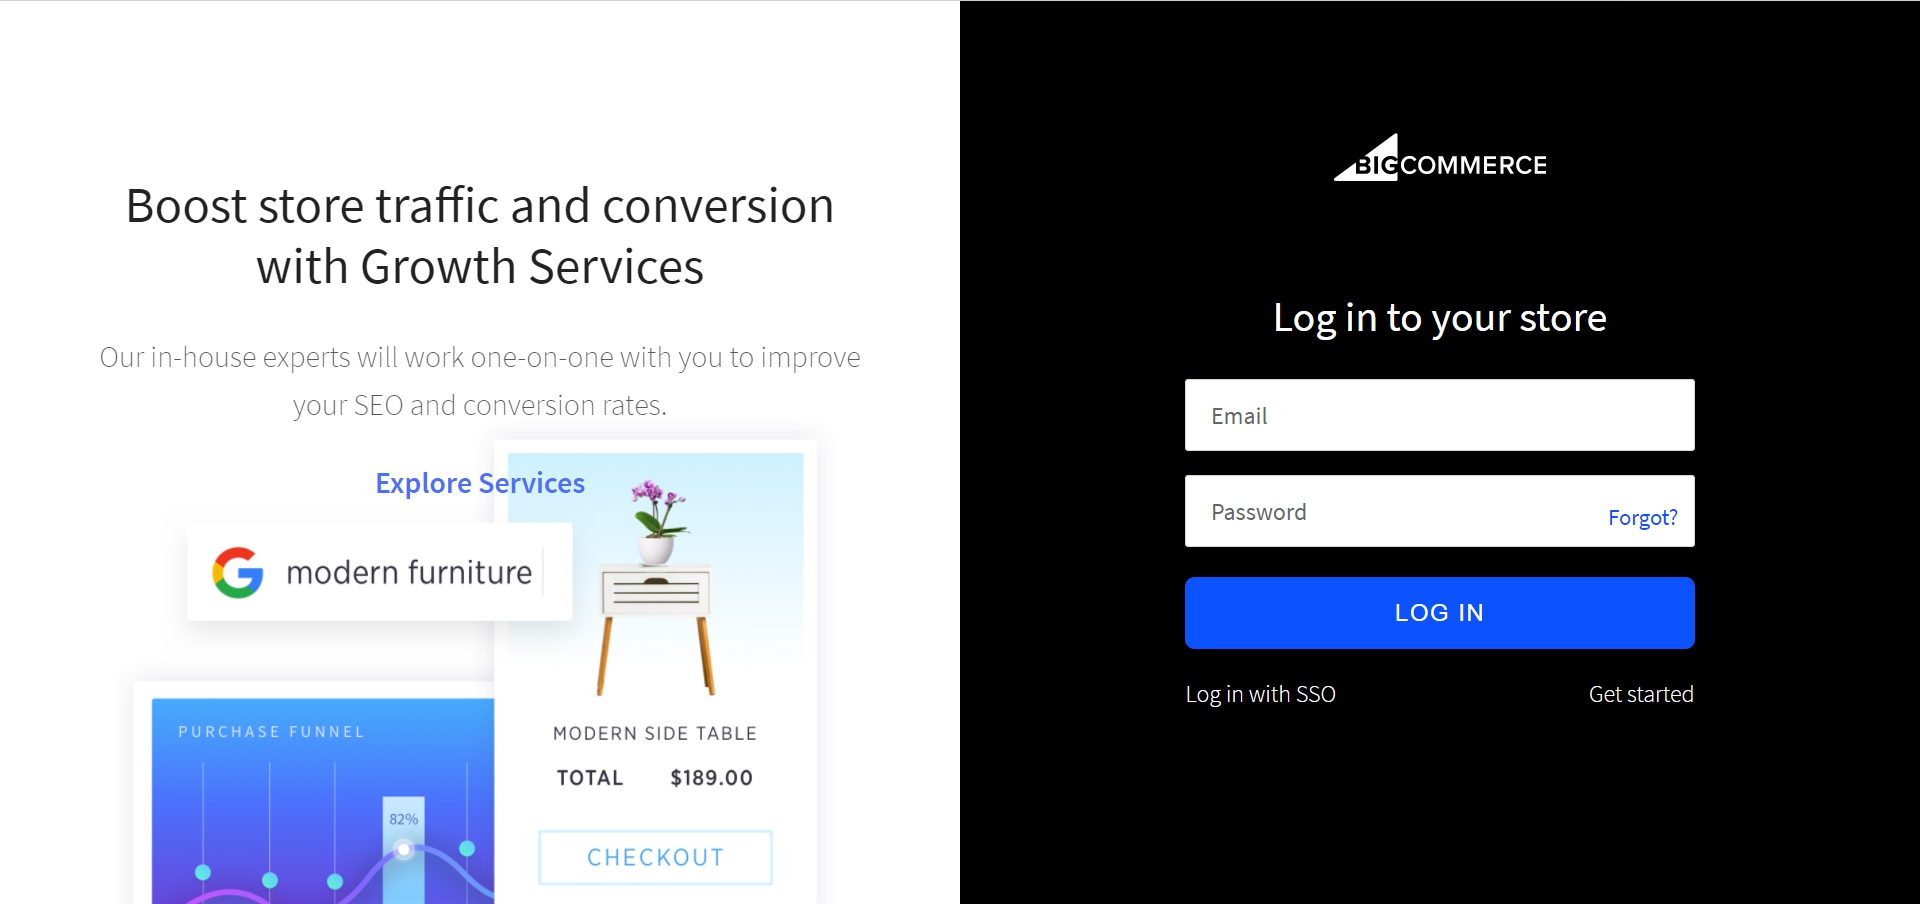 Log into your BigCommerce account, of course